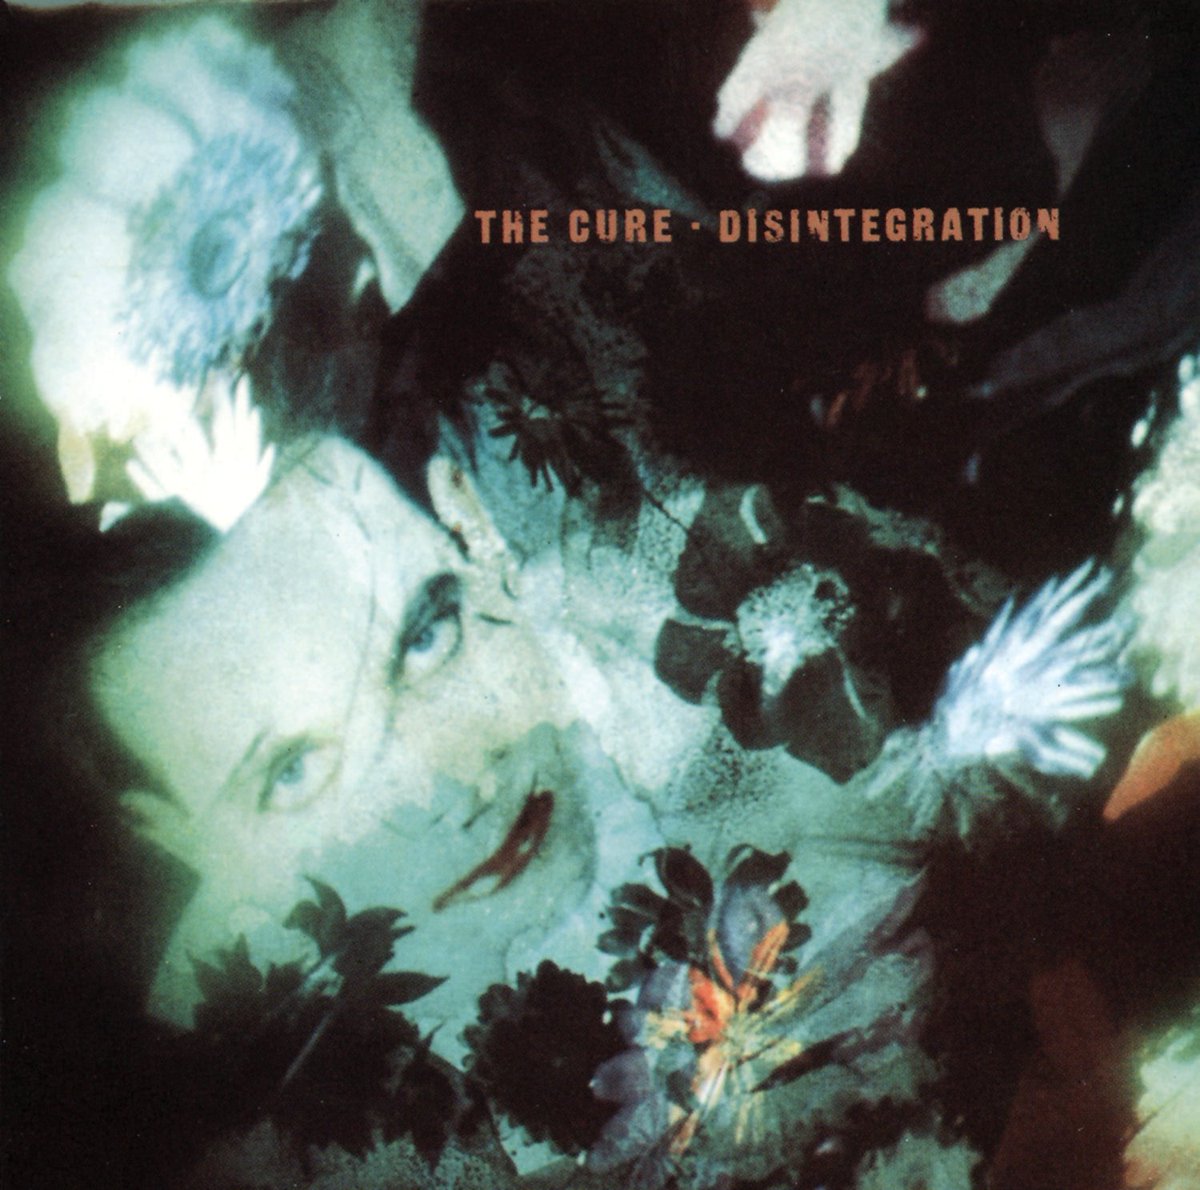 Dark, dreamlike and magical, 'Disintegration'  represents one of @thecure's finest hours.

Happy 35th Birthday to this seminal album.